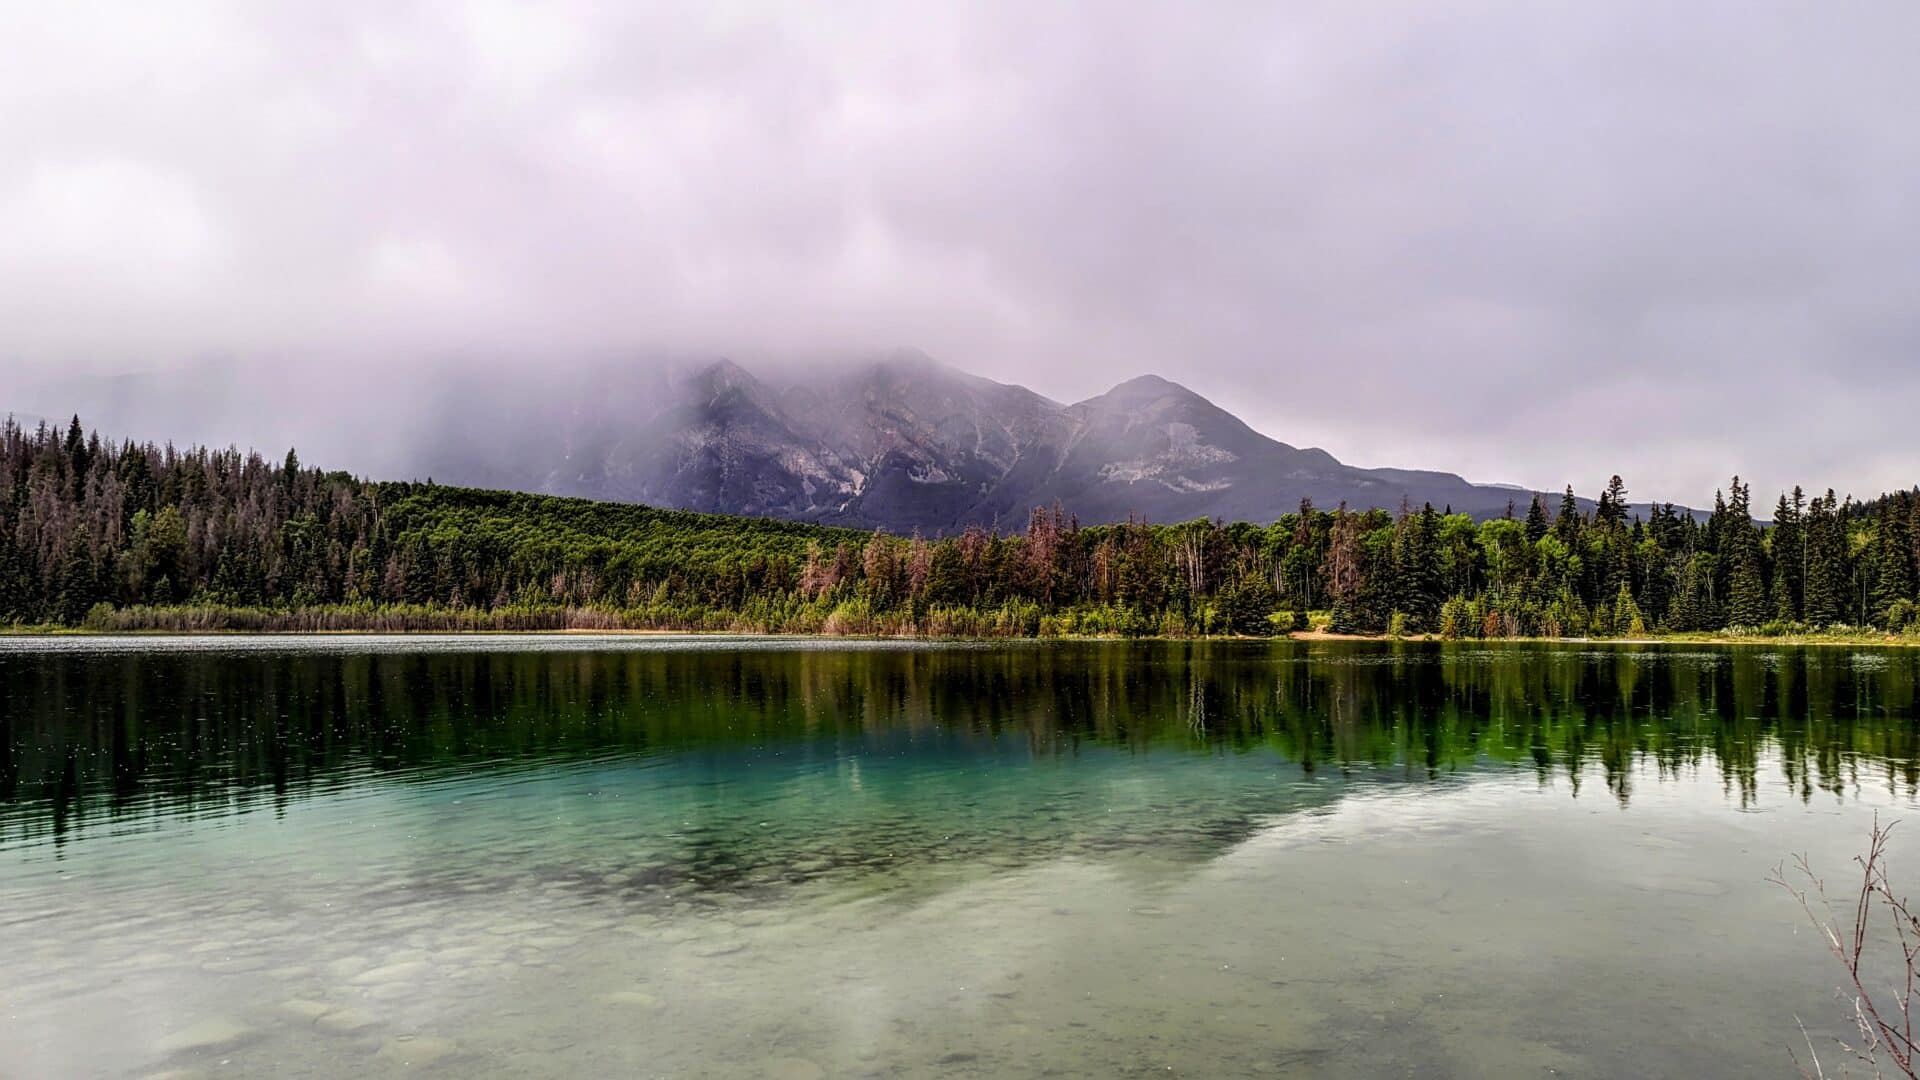 A lake reflects a line of trees and mountains on a cloudy day.